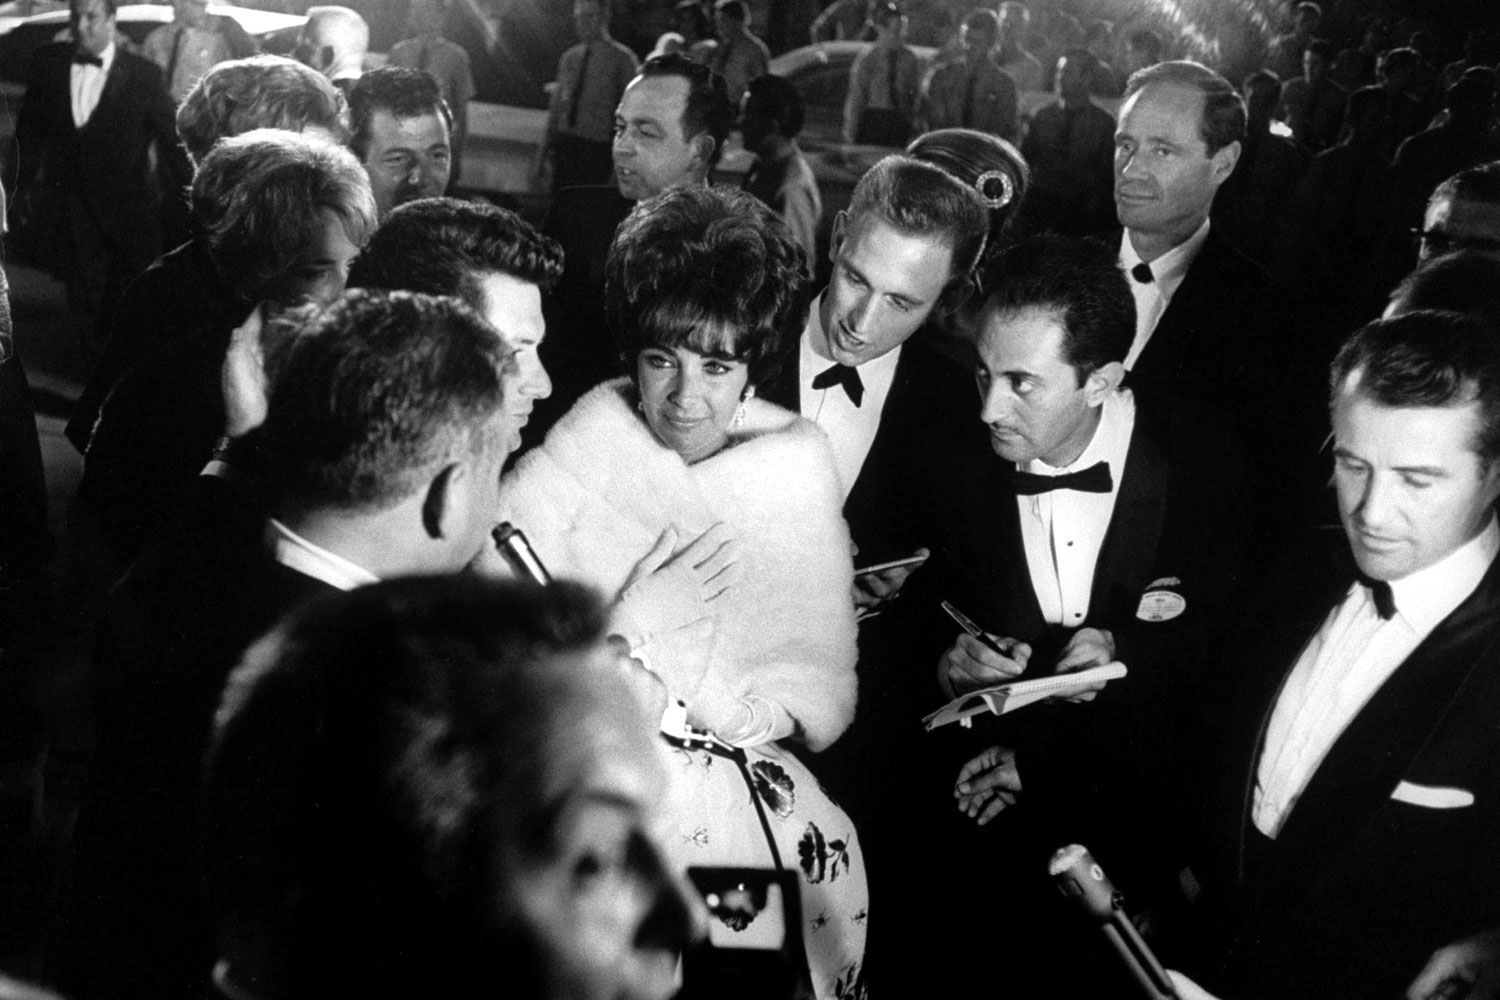 Elizabeth Taylor walks through a crowd of admirers at the Oscars in 1961.